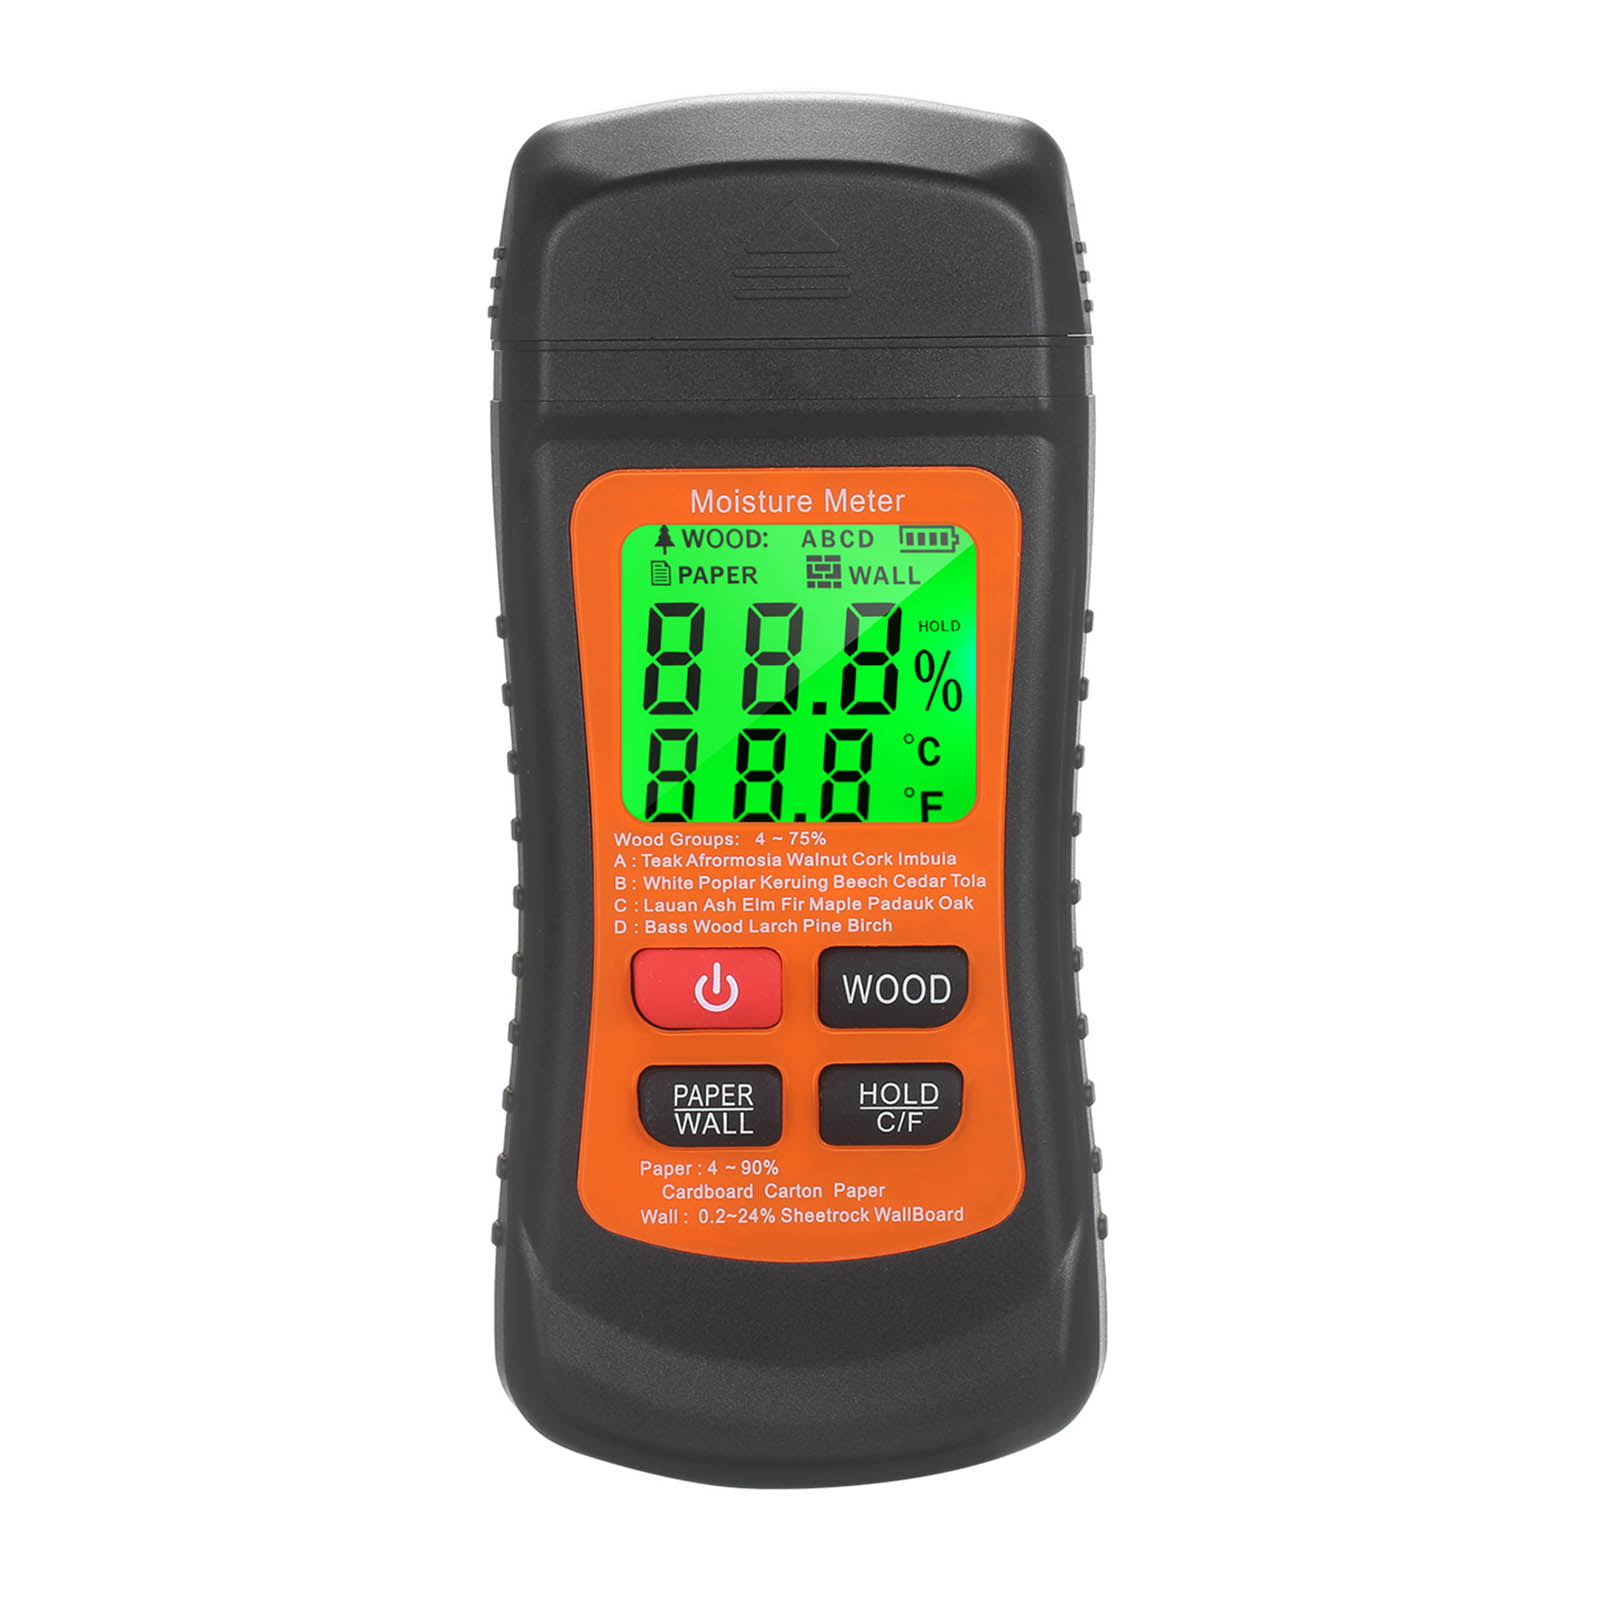 Hengory Moisture Meter LCD Display 3xAAA Battery Driving Determining The Moisture Content of Wood Fiber Materials Durable 4 Wood Groups Approximately 50 Species of Wood 3xAAA Battery Not Included 